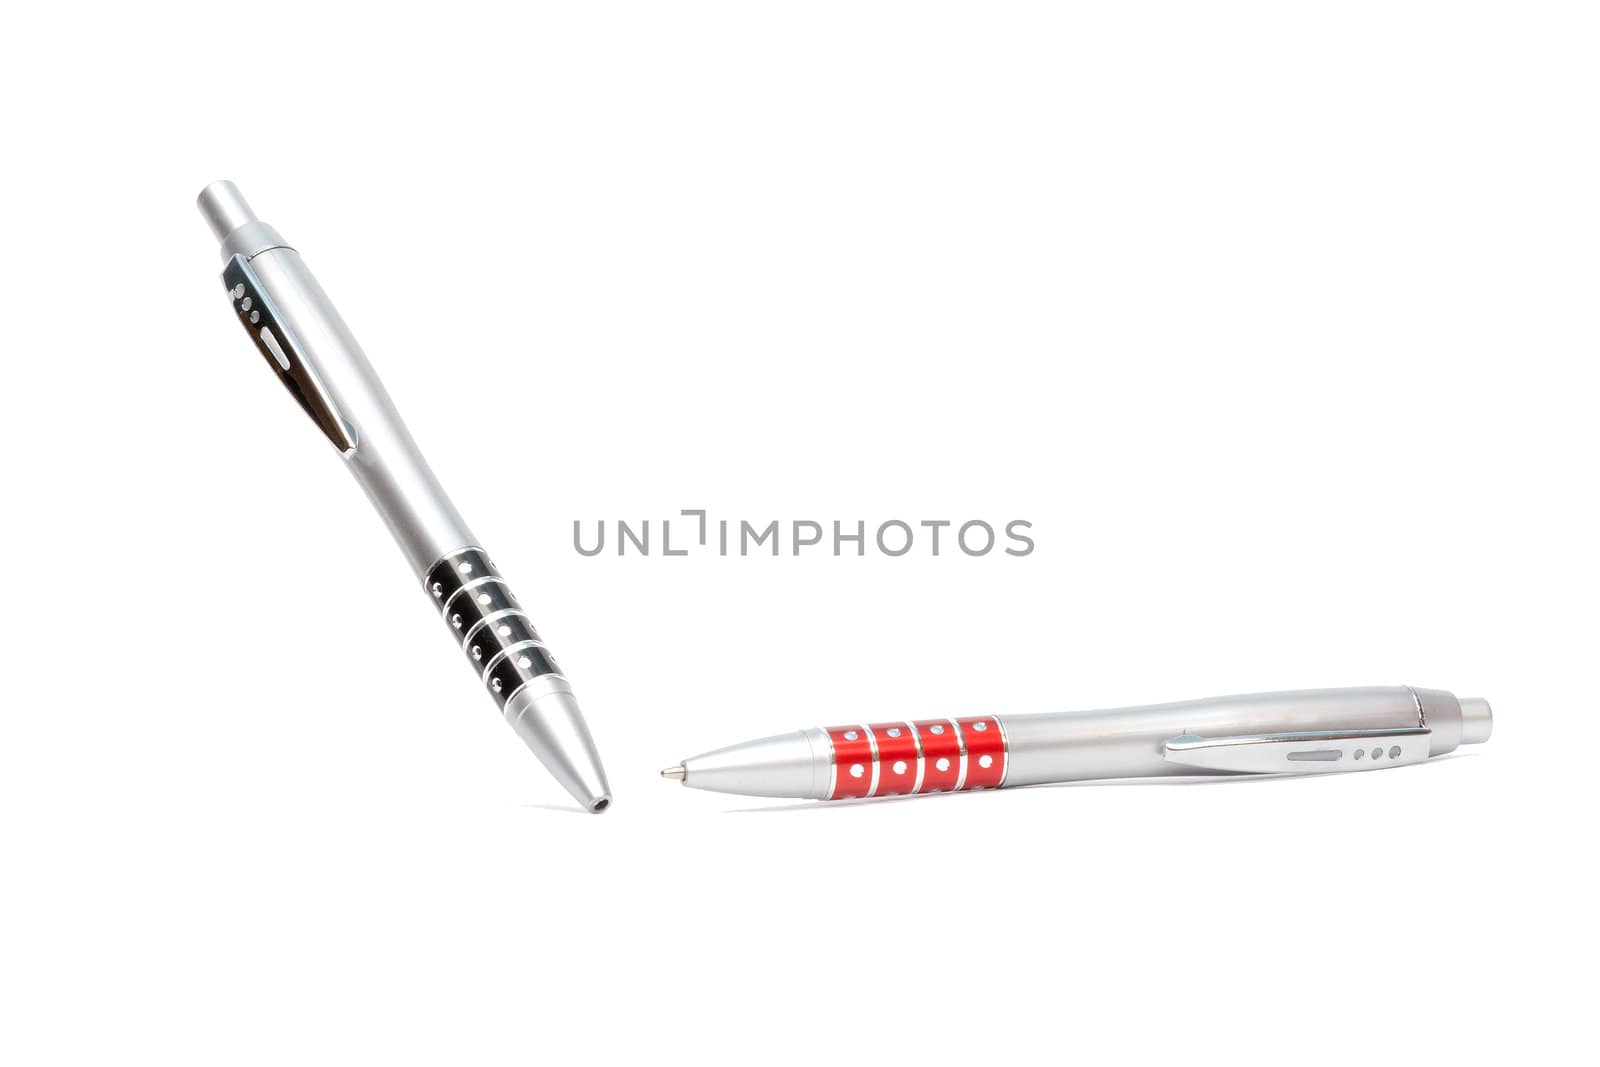 Two pens at various angles on a white background